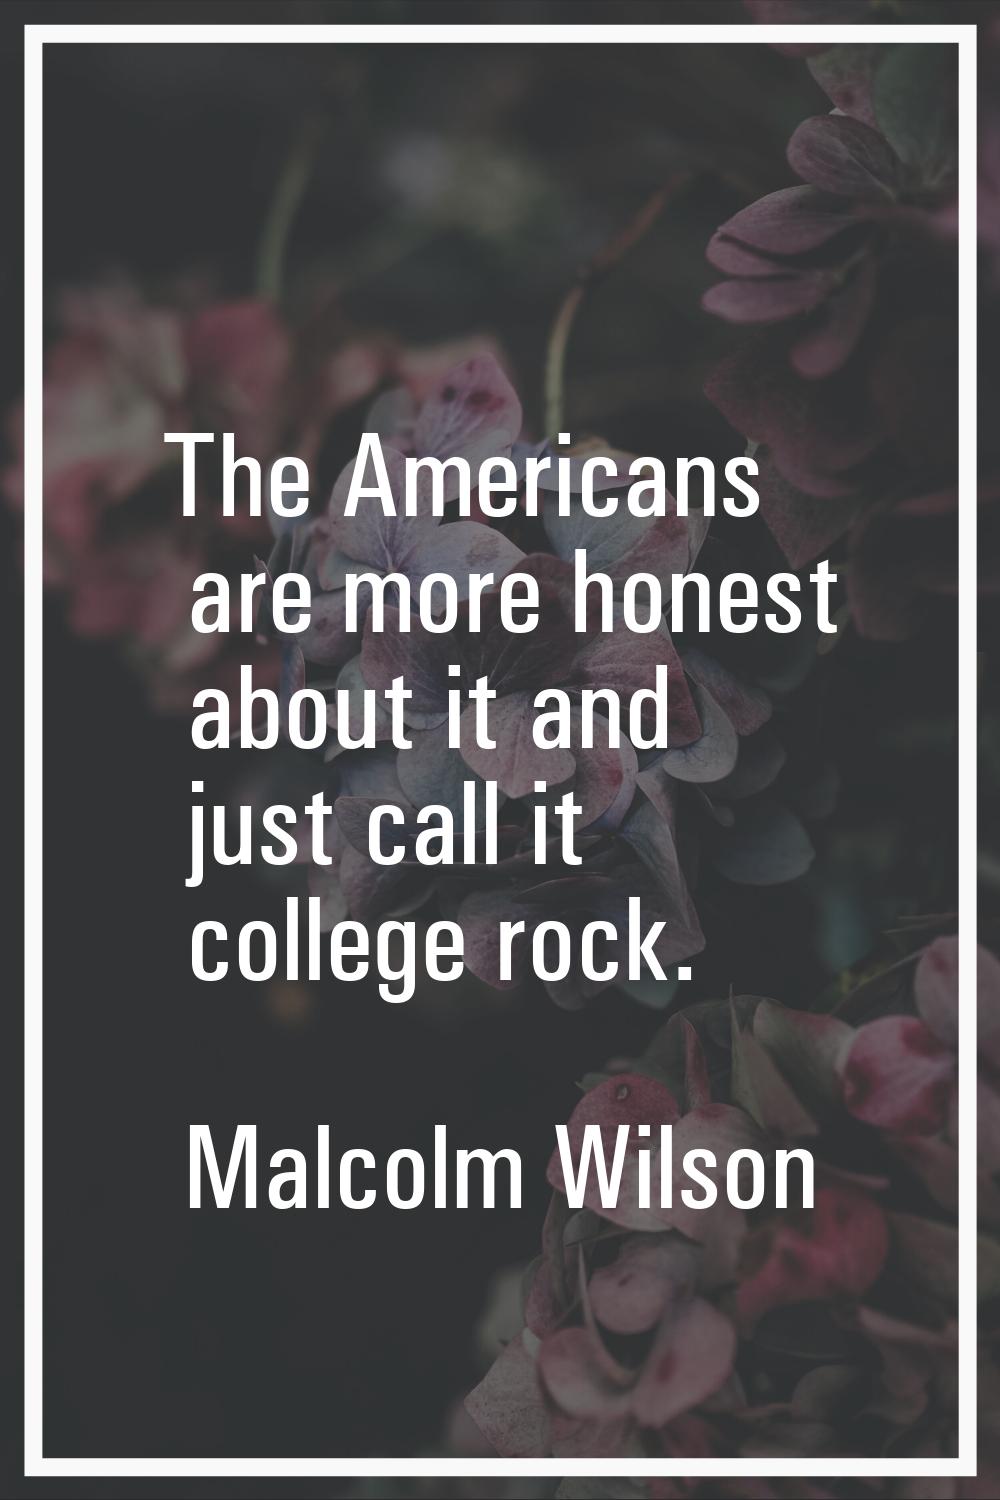 The Americans are more honest about it and just call it college rock.